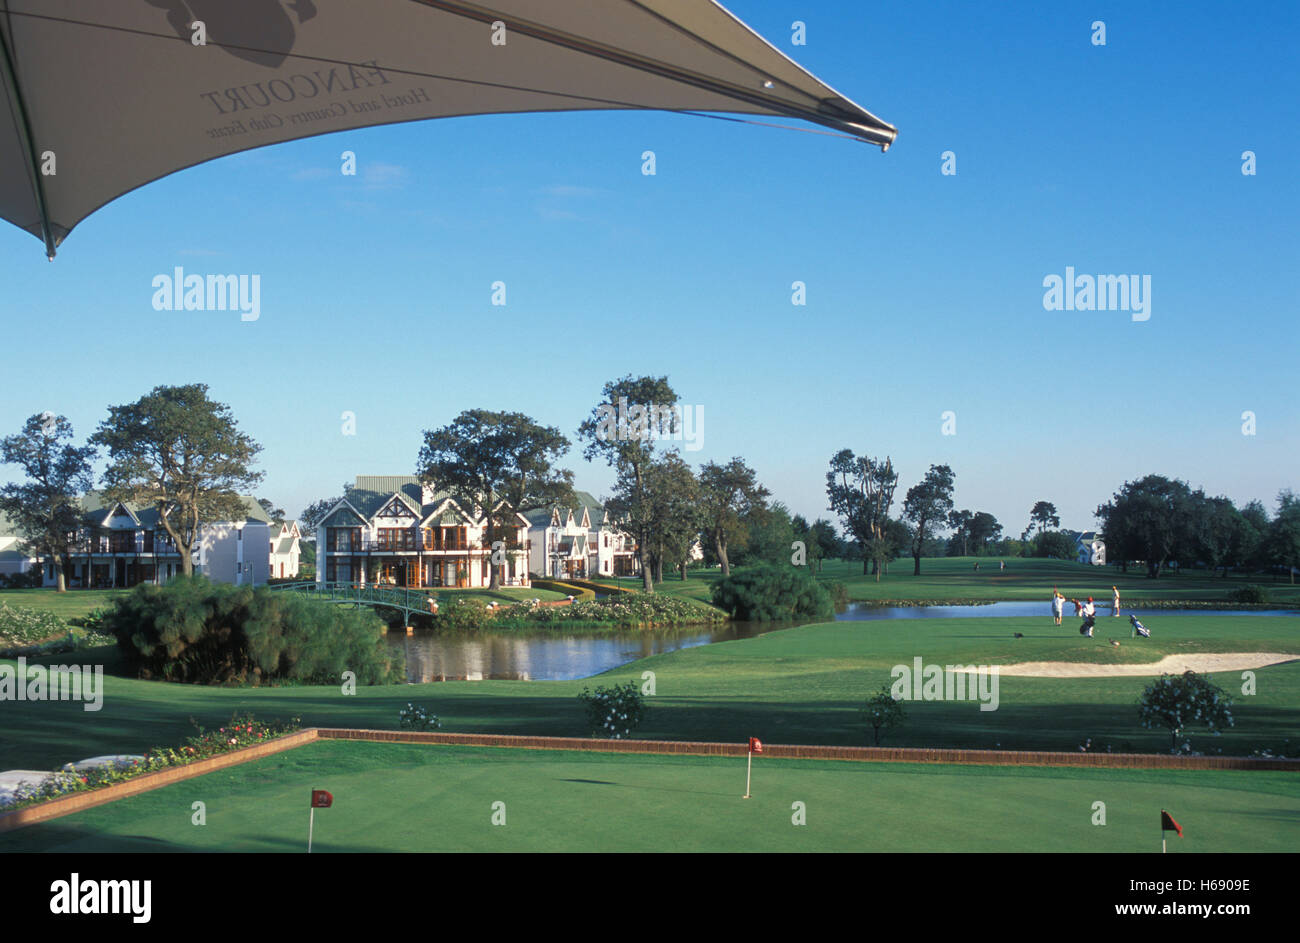 Golf Course Of The Fancourt Hotel And Country Club Estate George